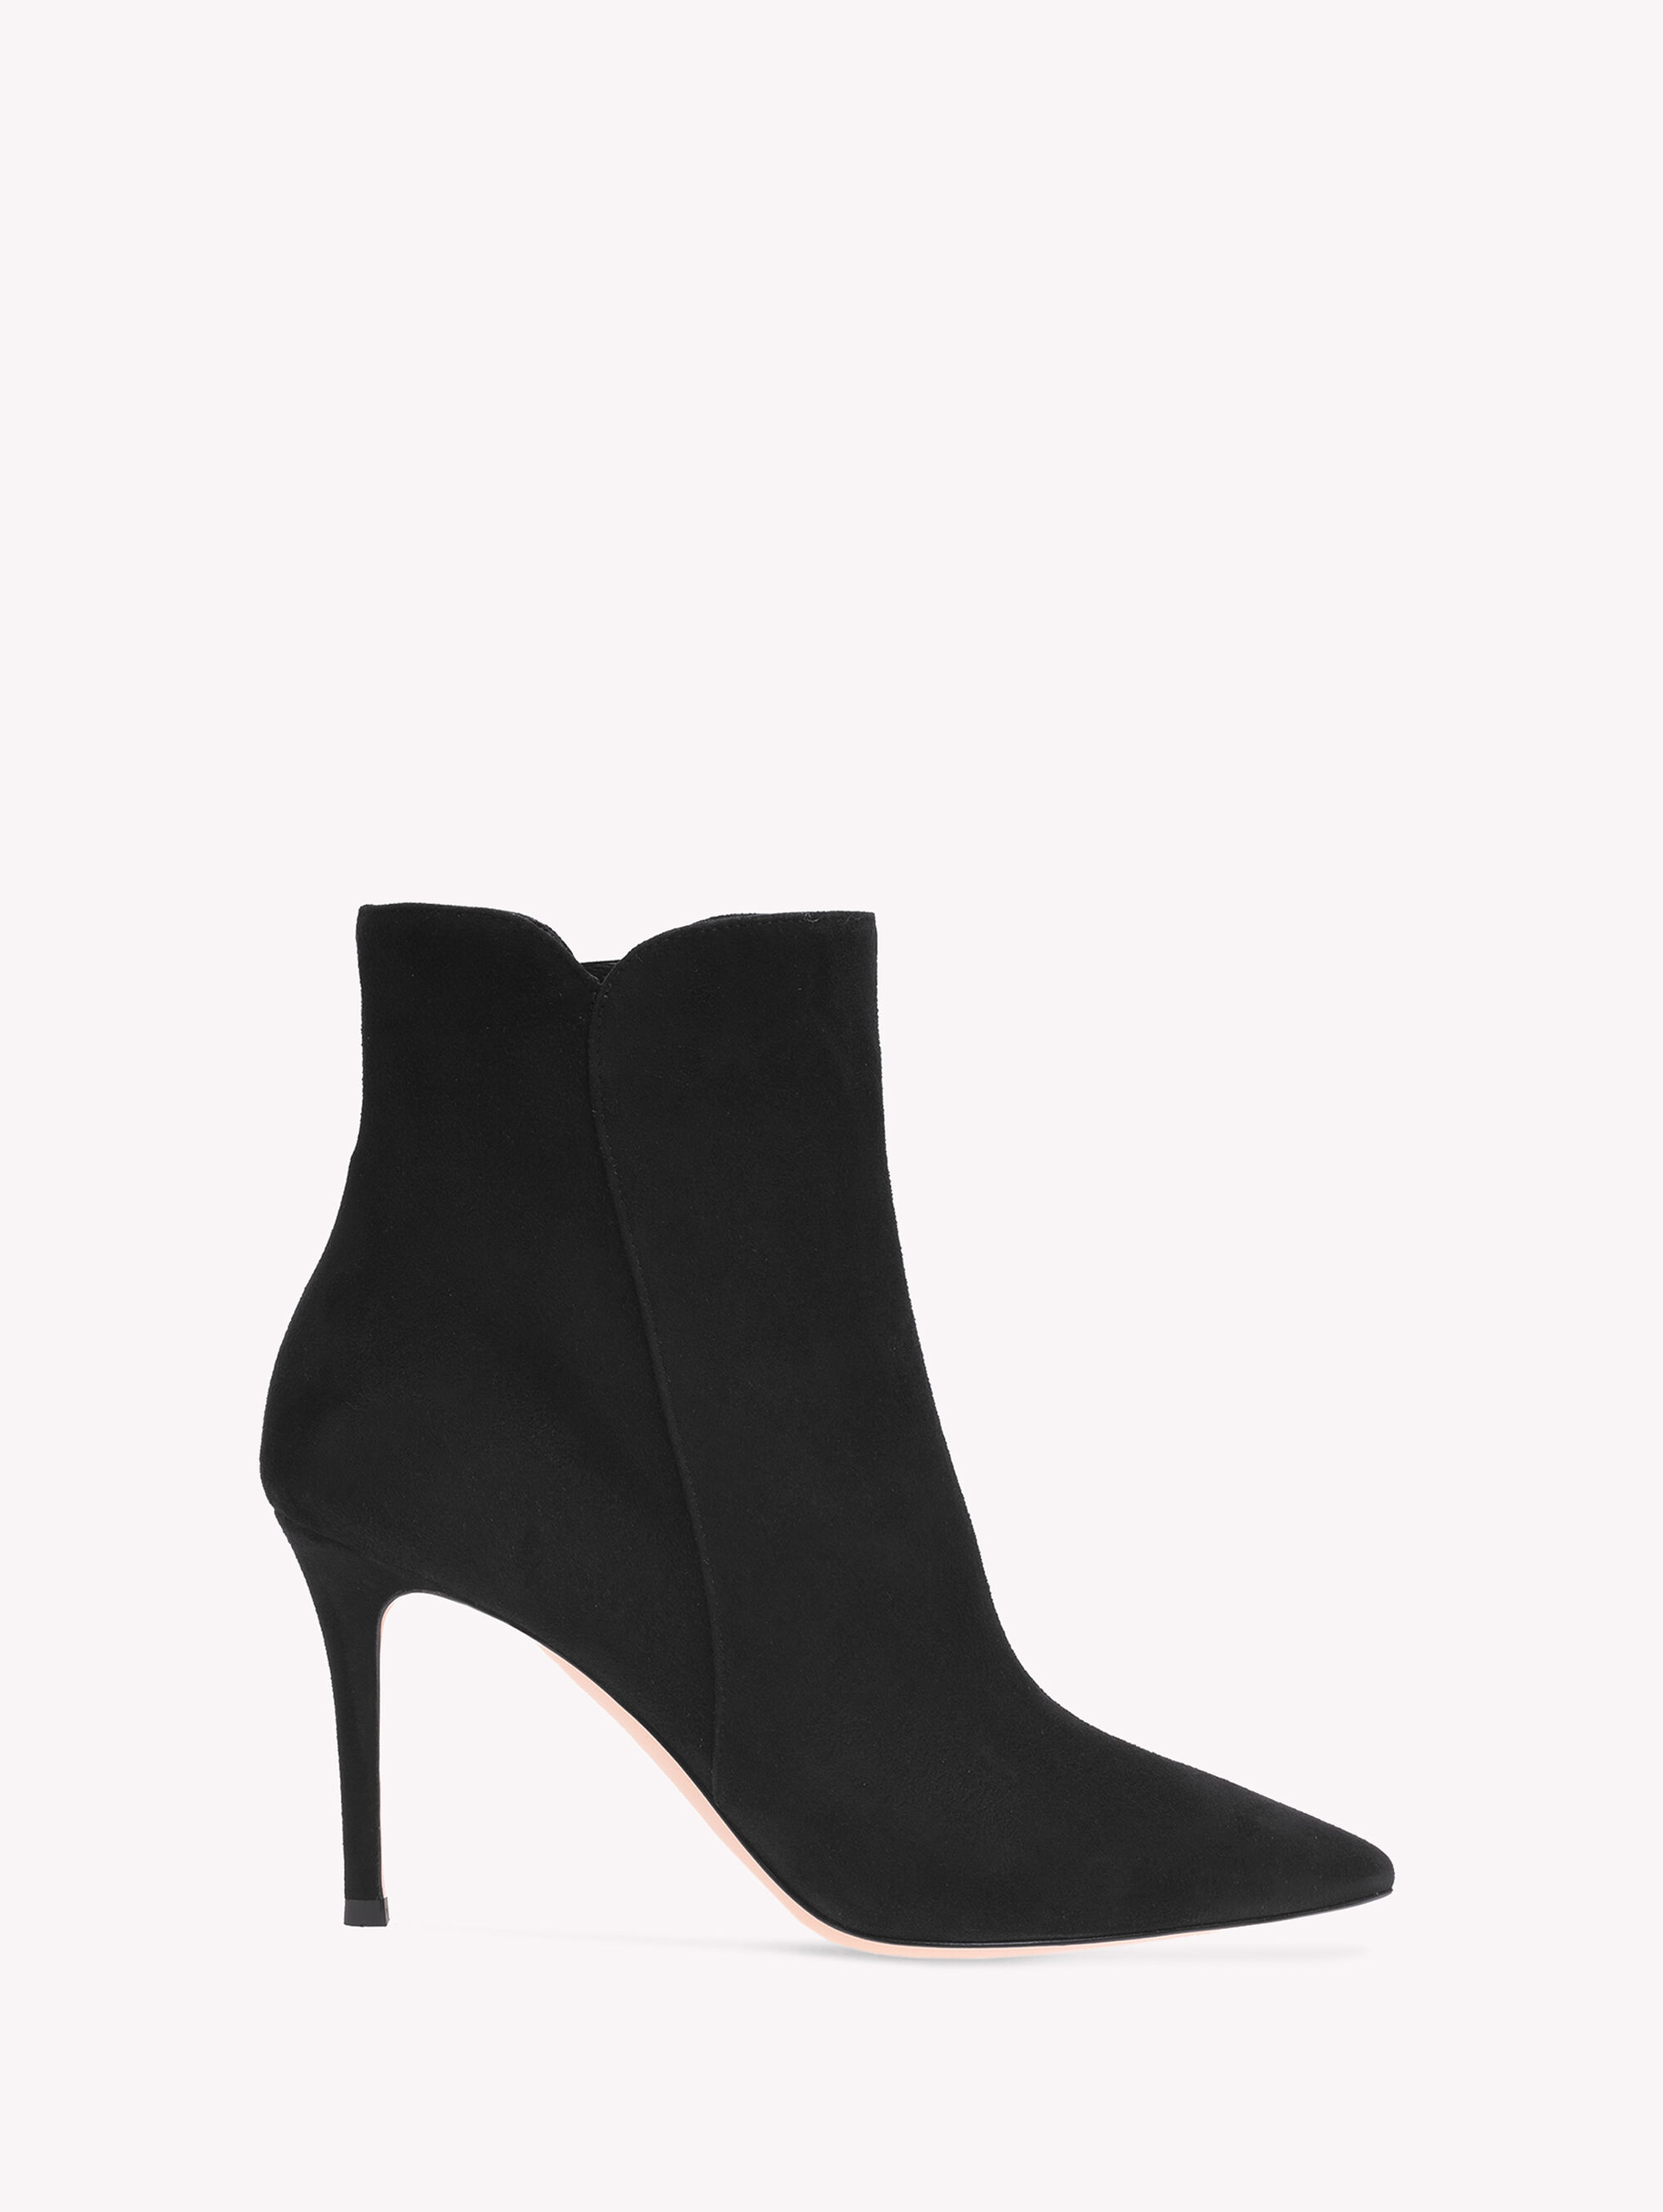 Ankle Boots for Women LEVY 85 | Gianvito Rossi